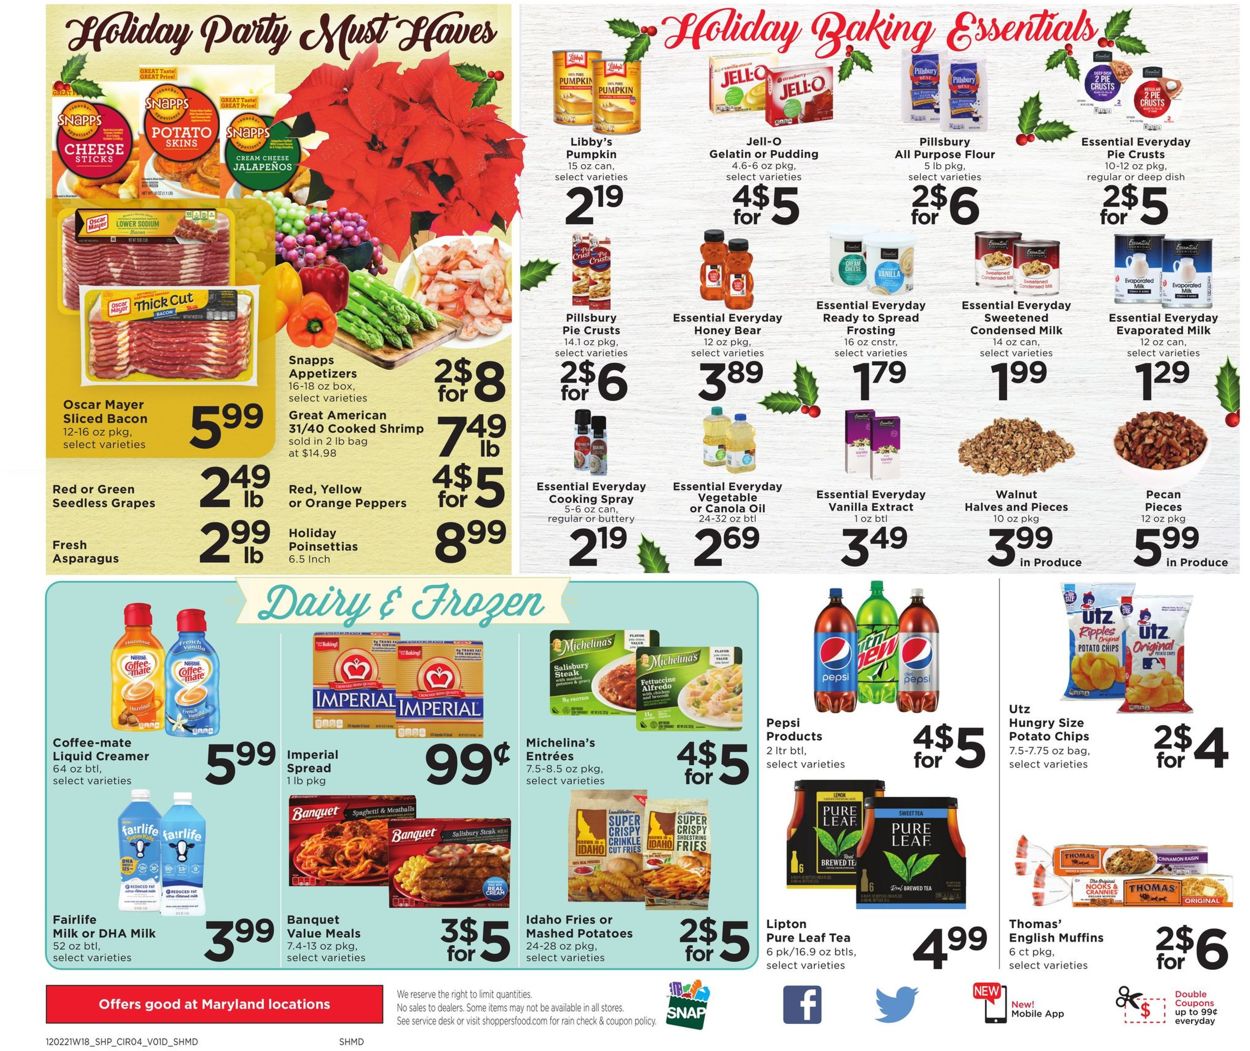 Catalogue Shoppers Food & Pharmacy HOLIDAYS 2021 from 12/02/2021